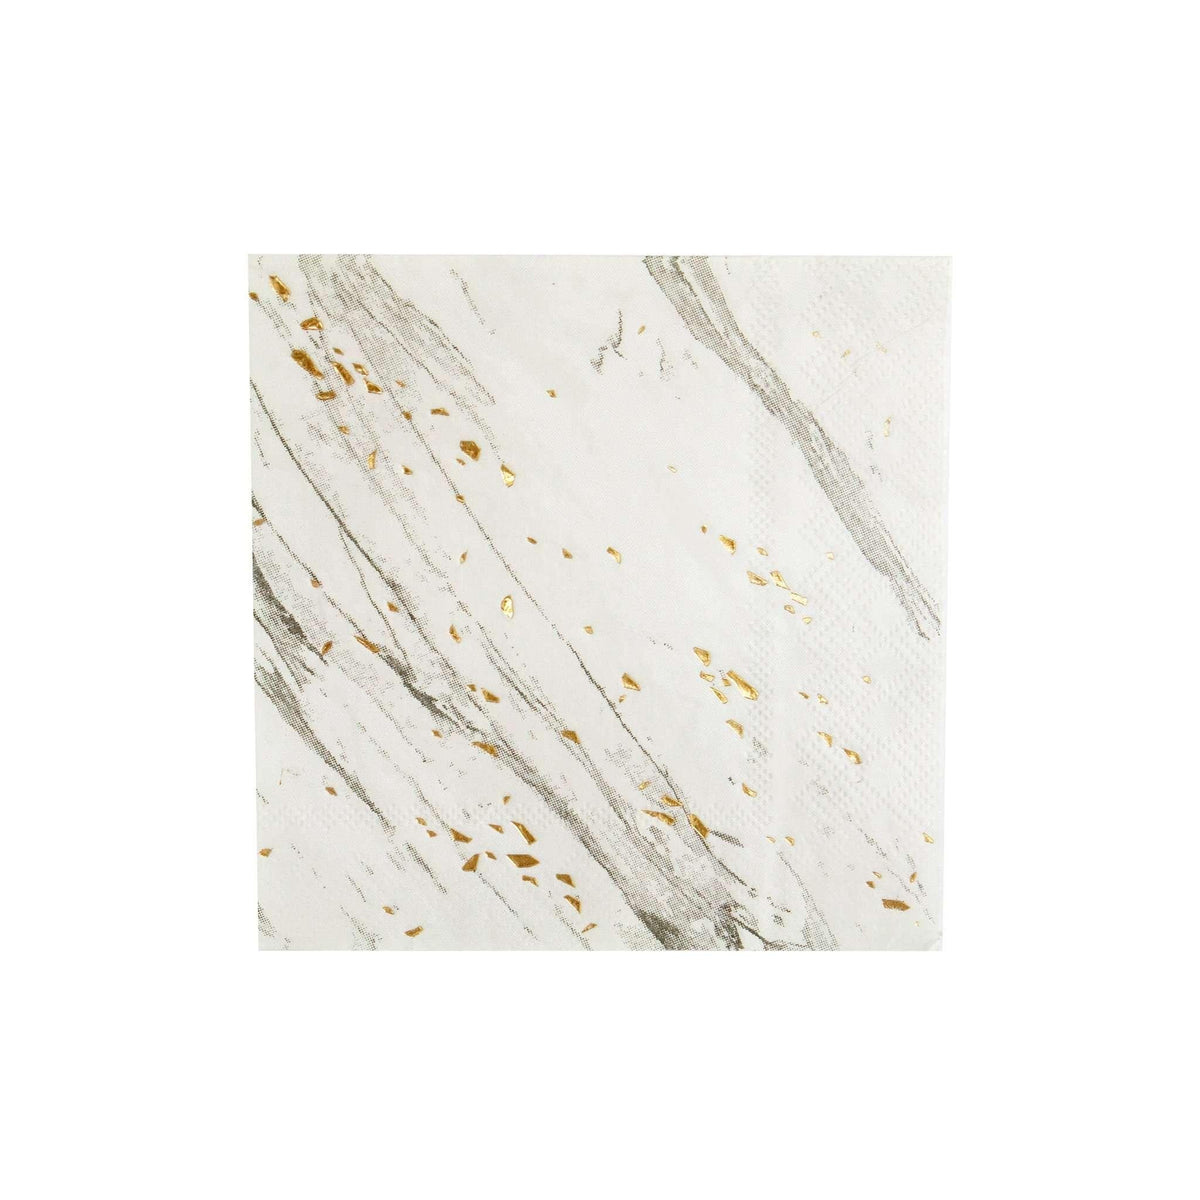 YIWU SANDY PAPER PRODUCTS CO., LTD Everyday Entertaining White Marble Beverage Napkins, 16 Count